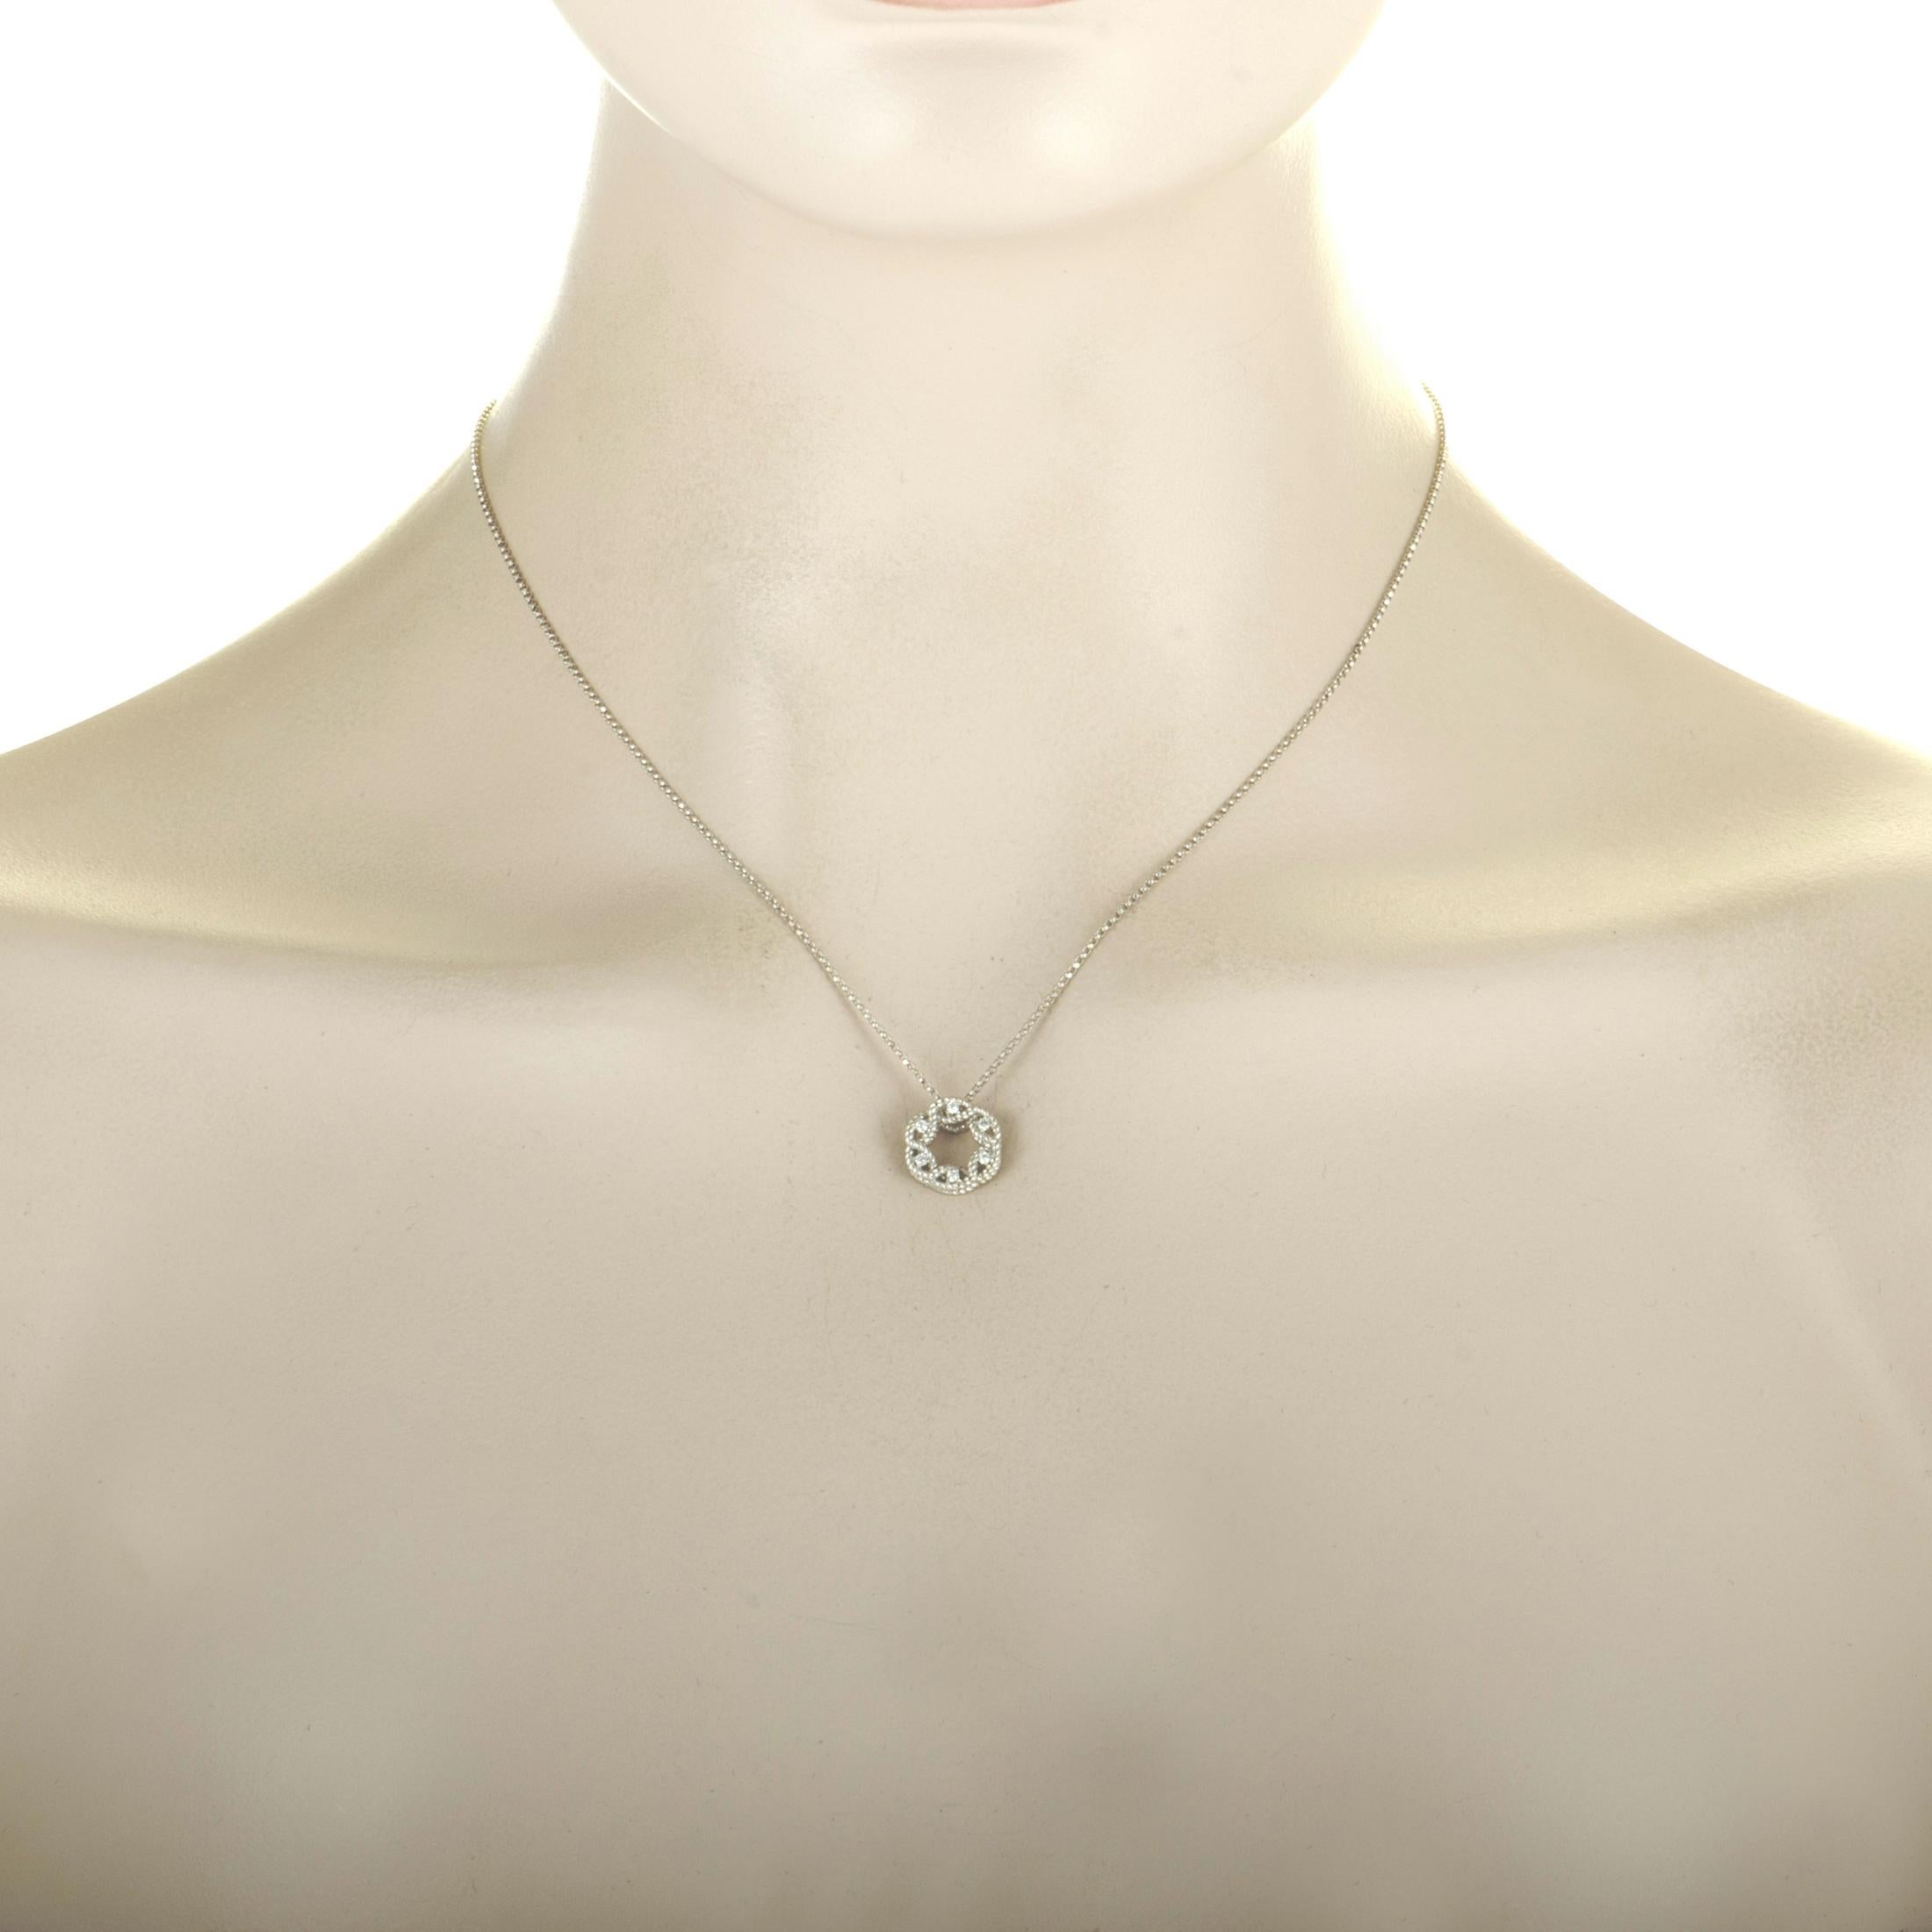 The “New Barocco” necklace by Roberto Coin is crafted from 18K white gold and embellished with diamonds that amount to 0.10 carats. The necklace weighs 4.3 grams, boasting a 16” chain onto which a 0.45” by 0.45” pendant is attached.
 
 This item